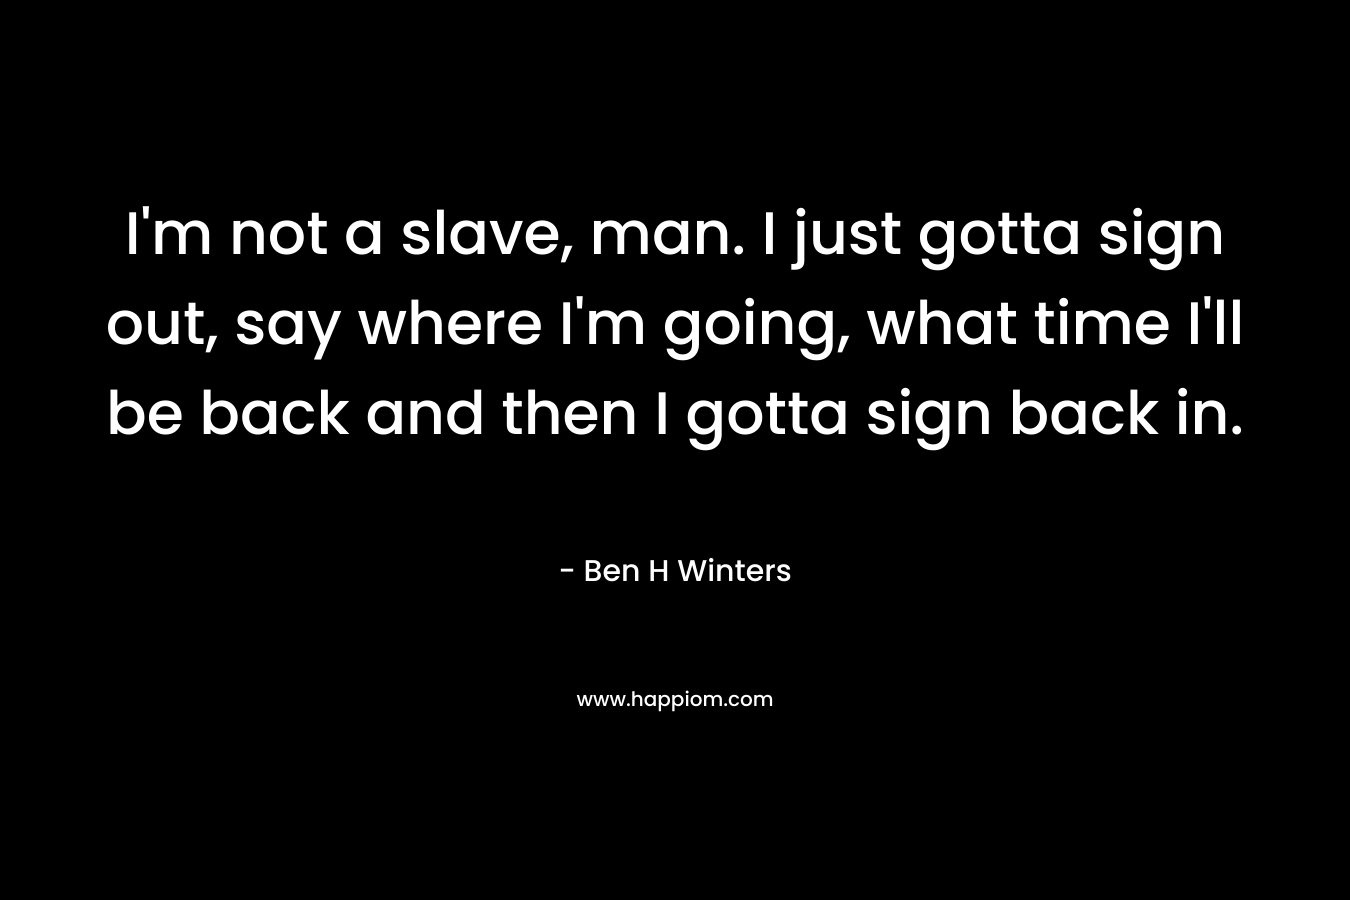 I'm not a slave, man. I just gotta sign out, say where I'm going, what time I'll be back and then I gotta sign back in.